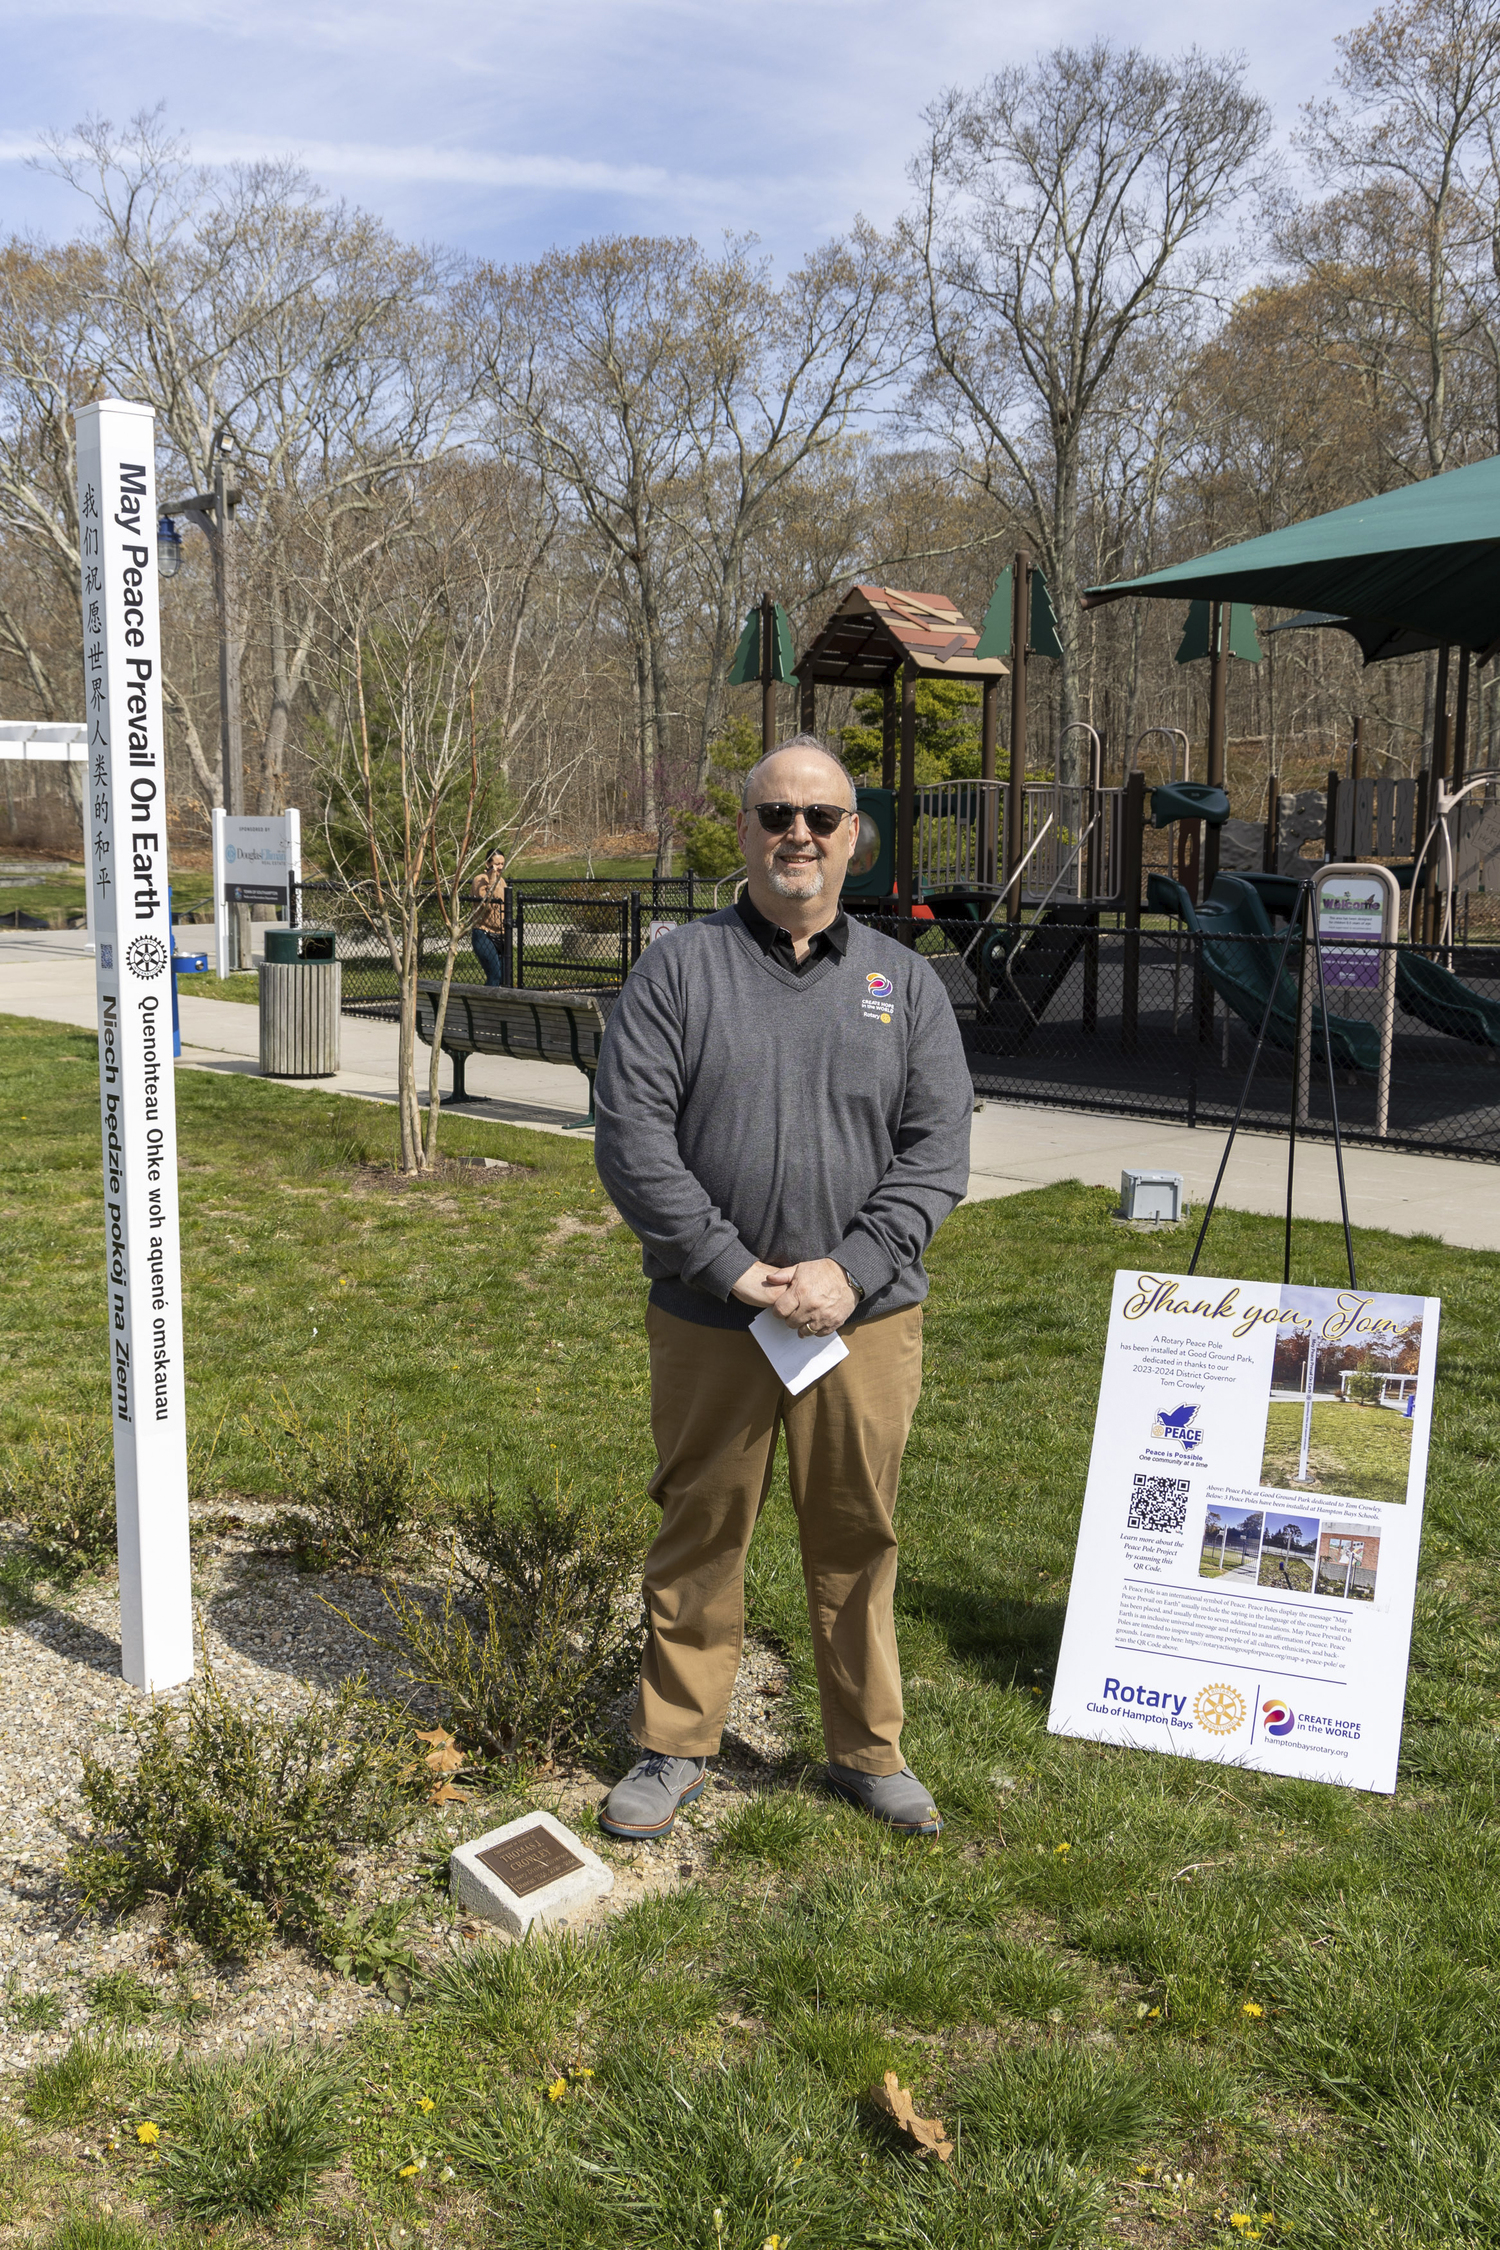 Tom Crowley of Hampton Bays, a 37-year member of the hamlet’s Rotary Club, was honored on Saturday with the dedication of a peace pole “May peace prevail on Earth,” in eight languages, at Good Ground Park.  MICHAEL O'CONNOR